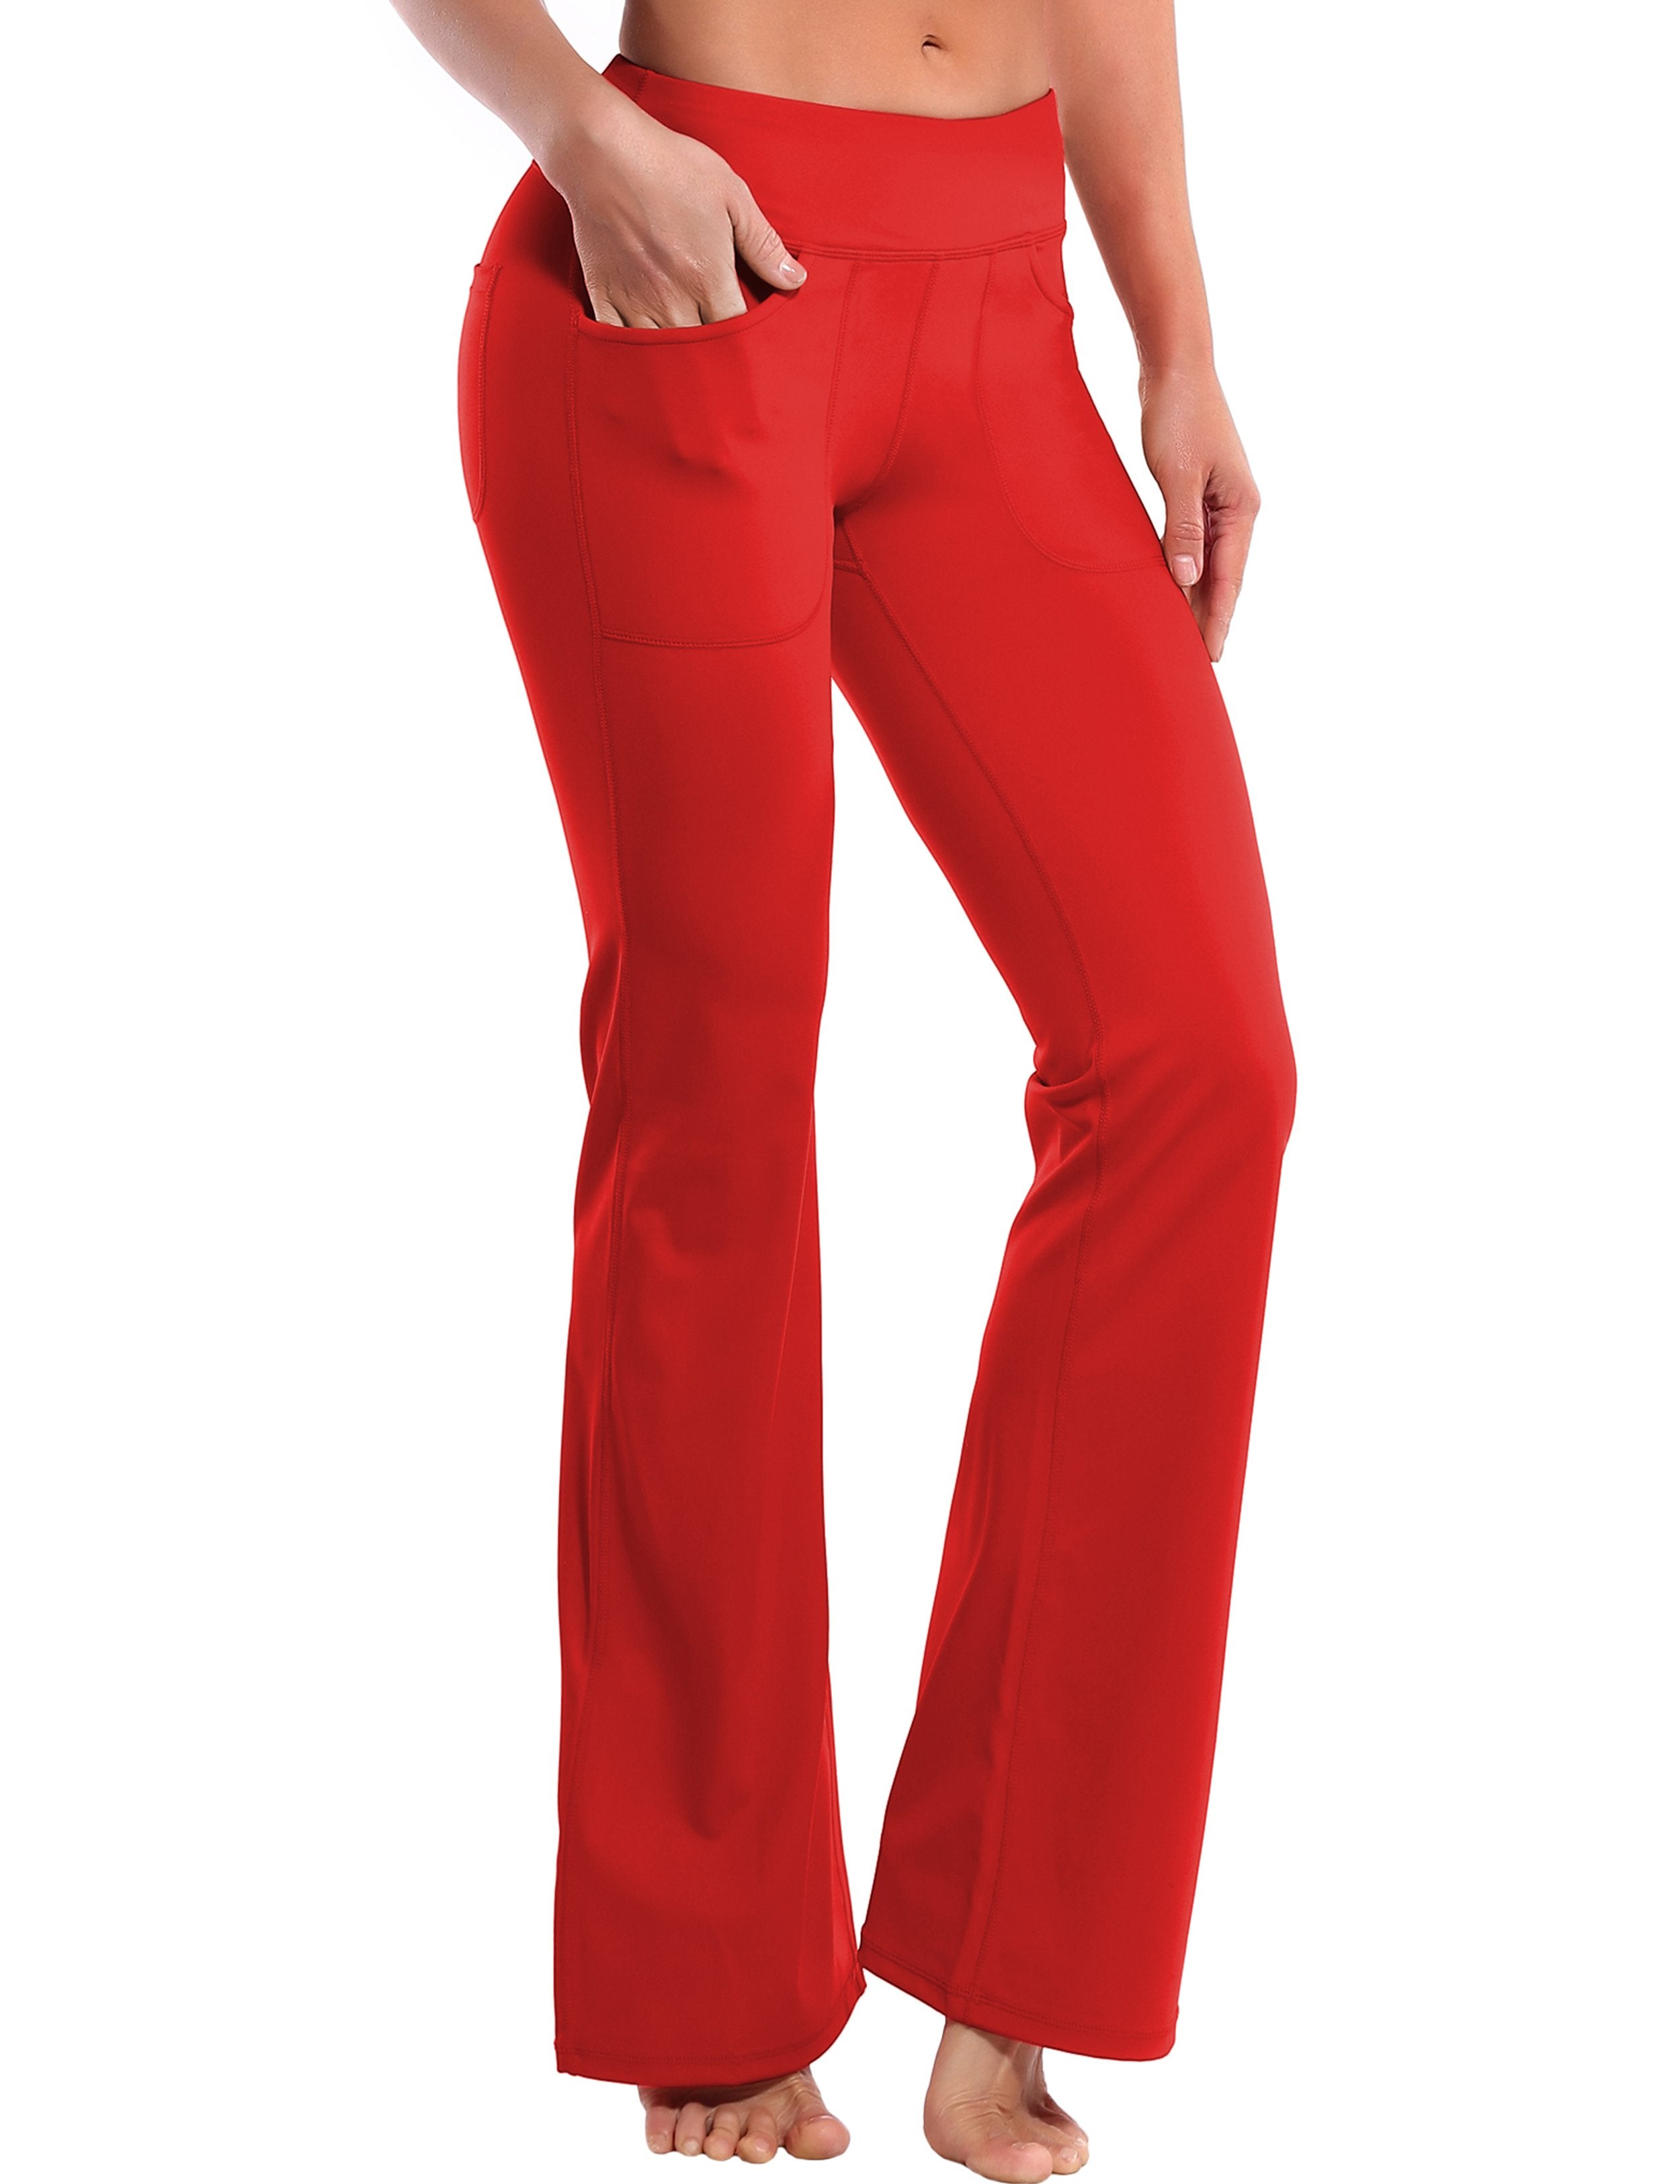 29 31 33 35 Bootcut Leggings with Pockets scarlet ins – bubblelime